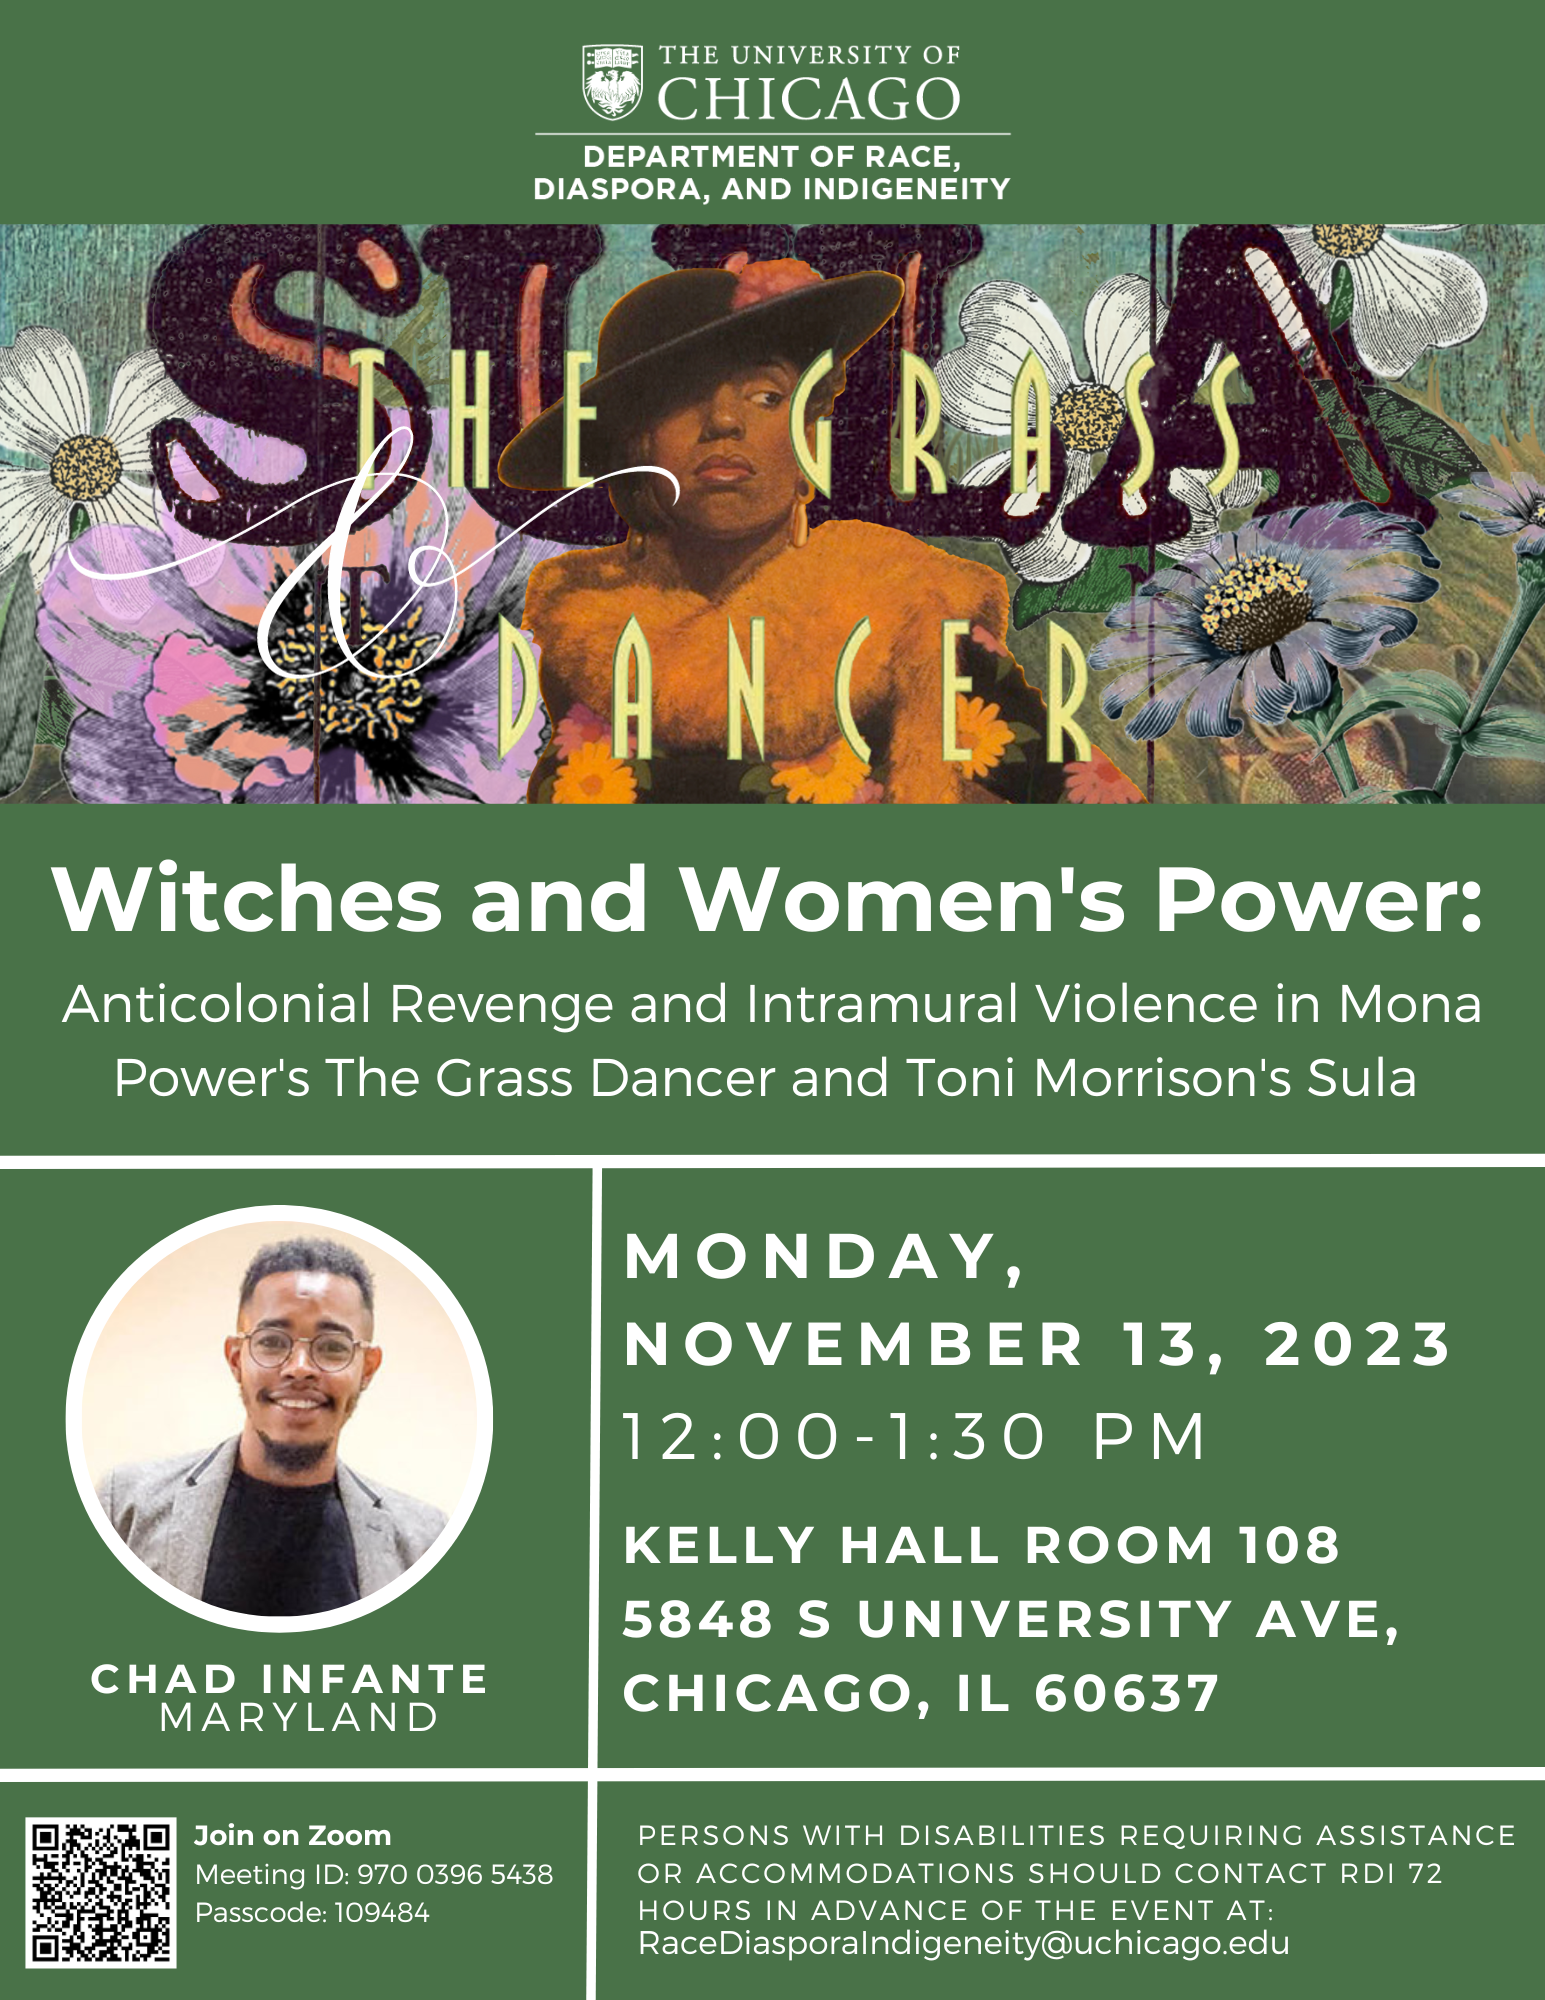 Witches and Women's Power:  Anticolonial Revenge and Intramural Violence in Mona Power's The Grass Dancer and Toni Morrison's Sula 